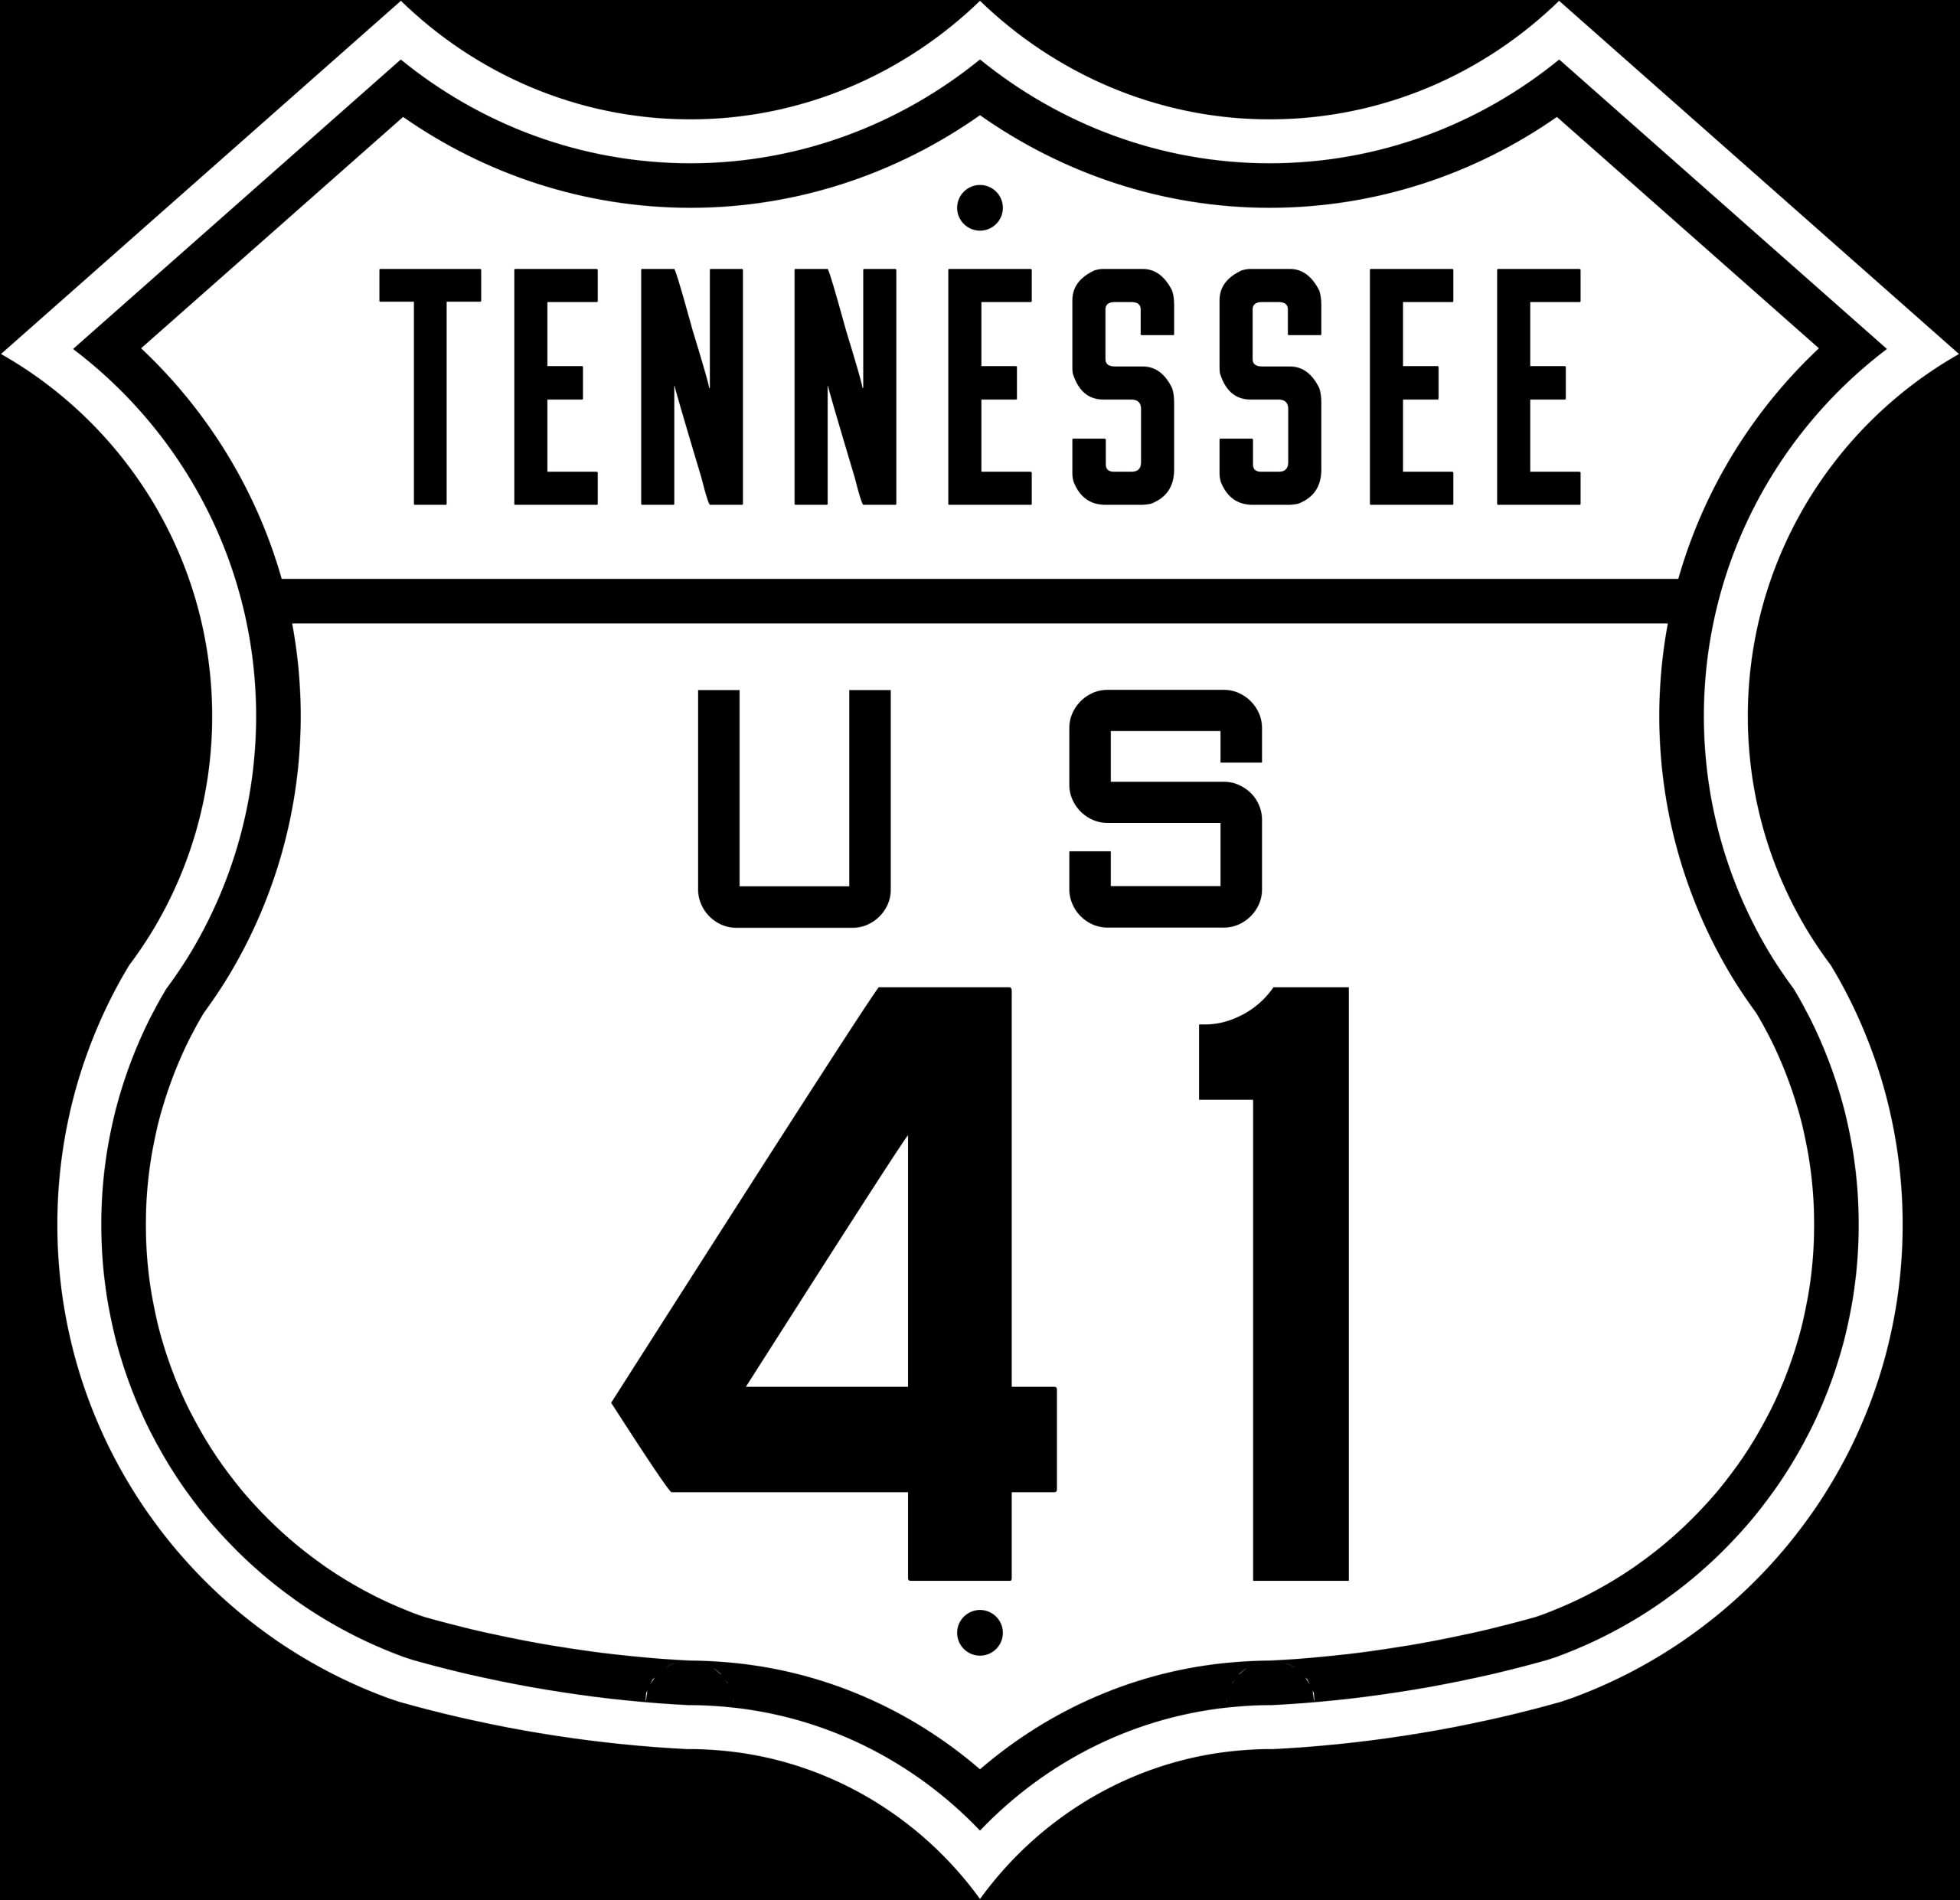 US 41 Tennessee sign